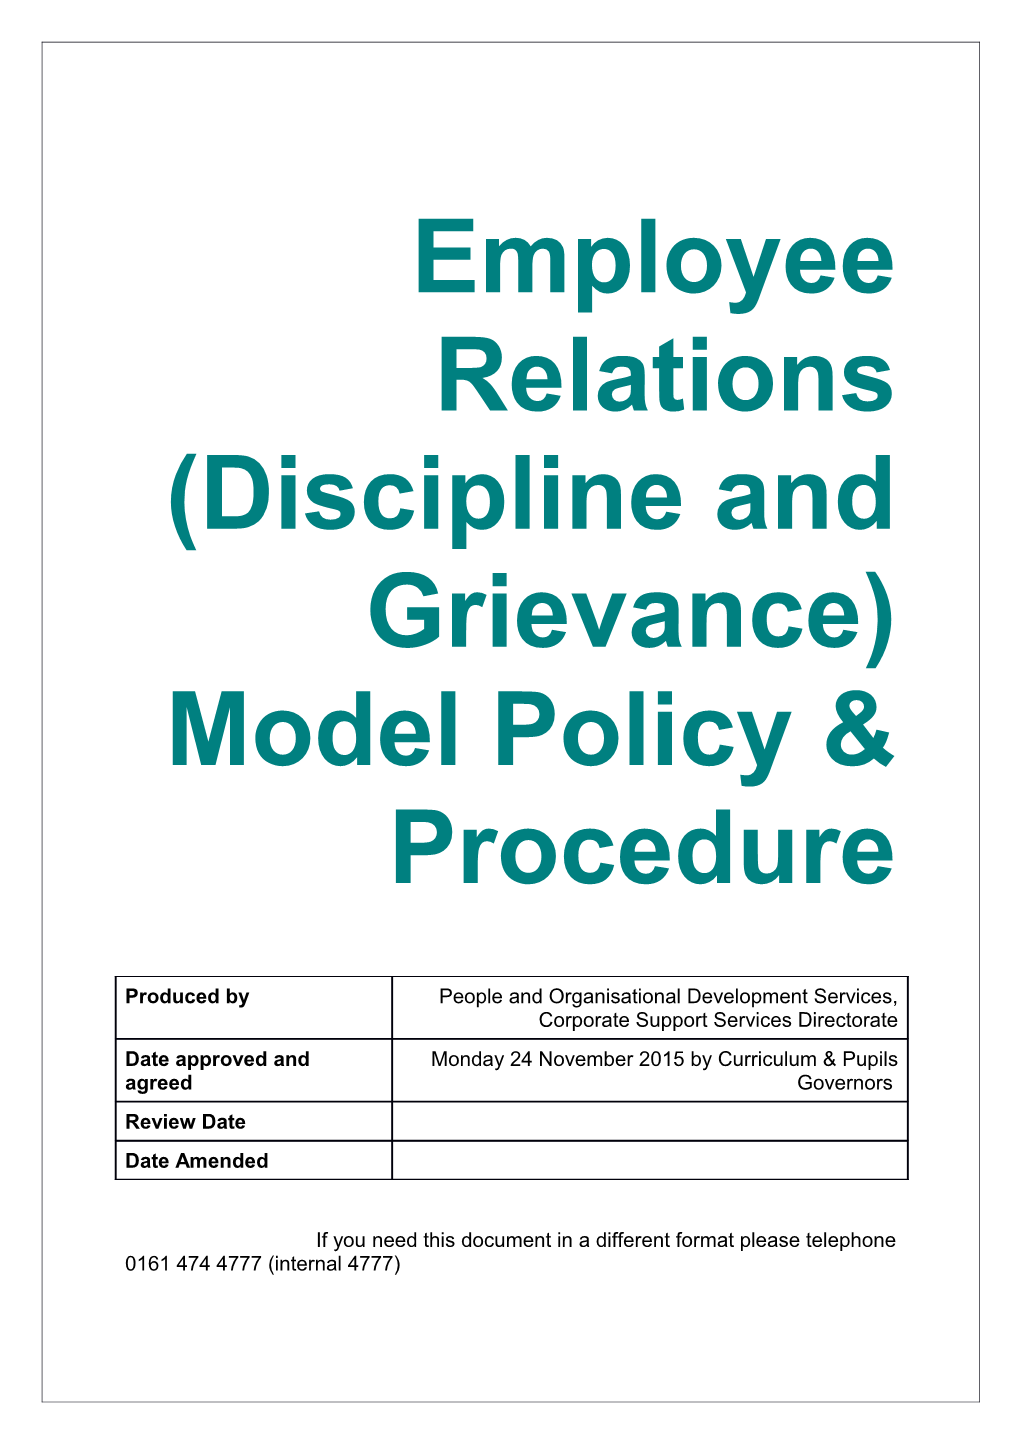 Employee Relations Policy and Procedure